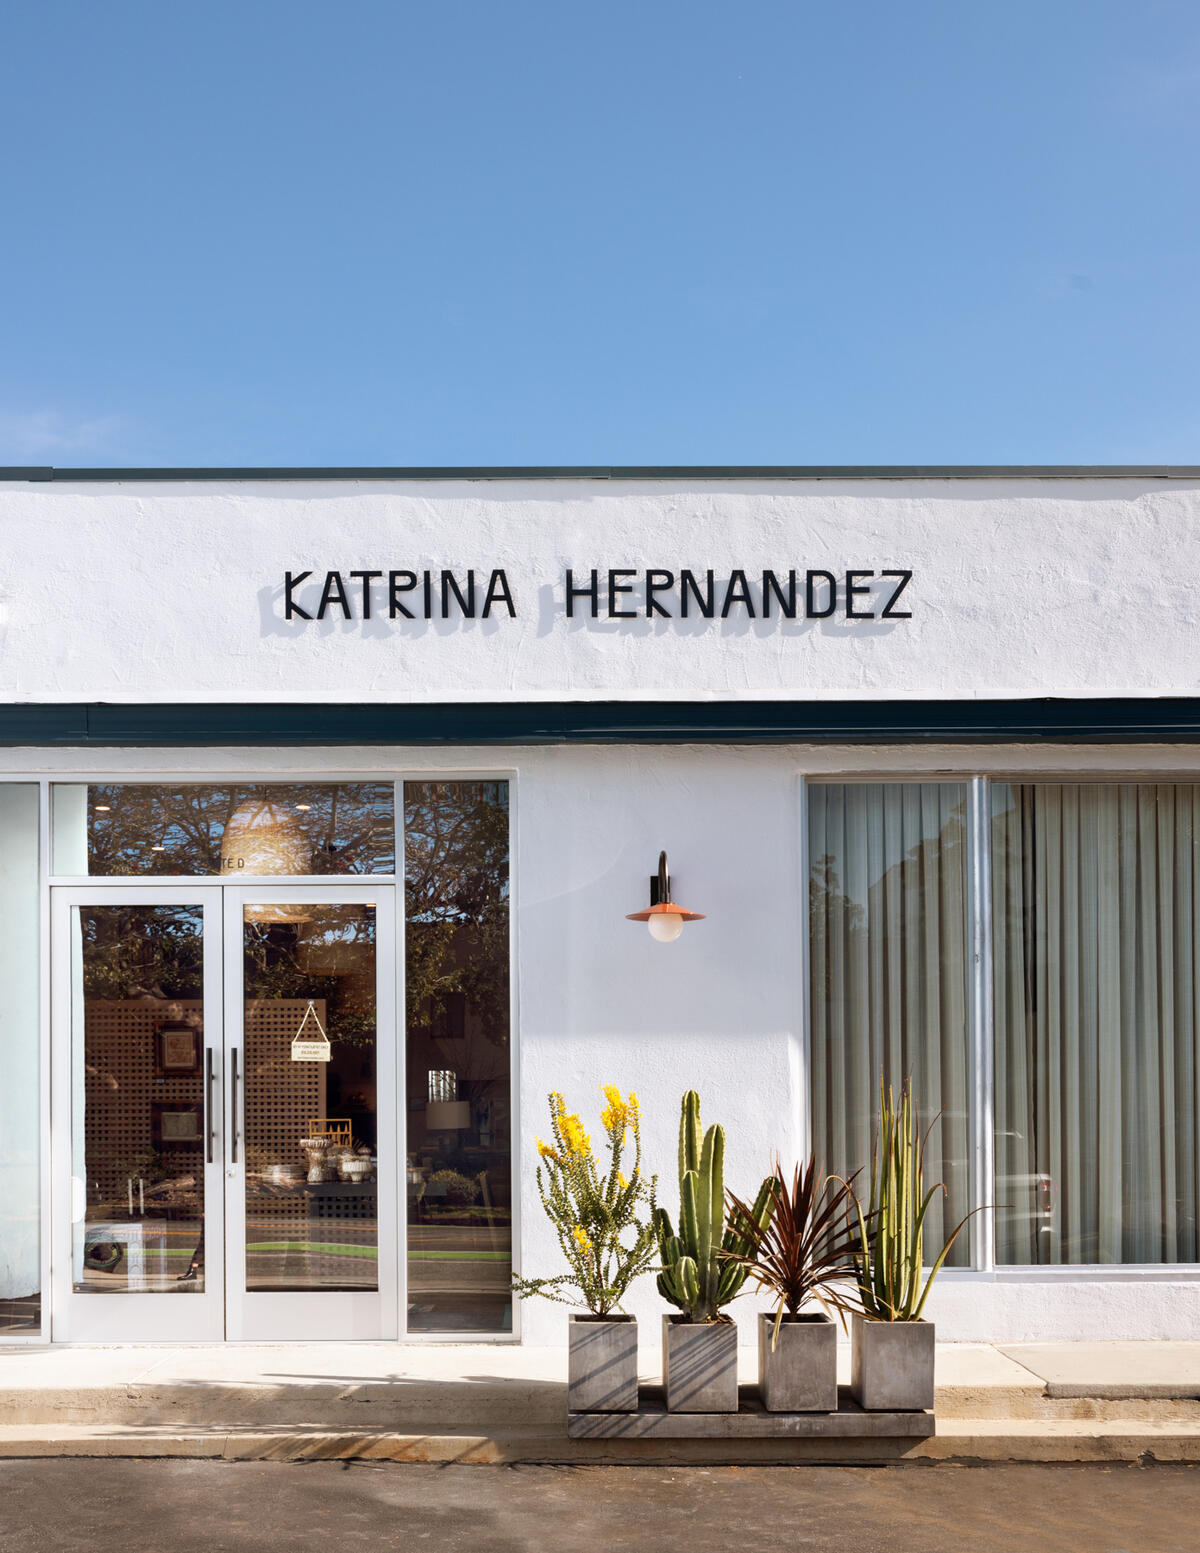 This retailer has created an accessories mecca in Los Angeles